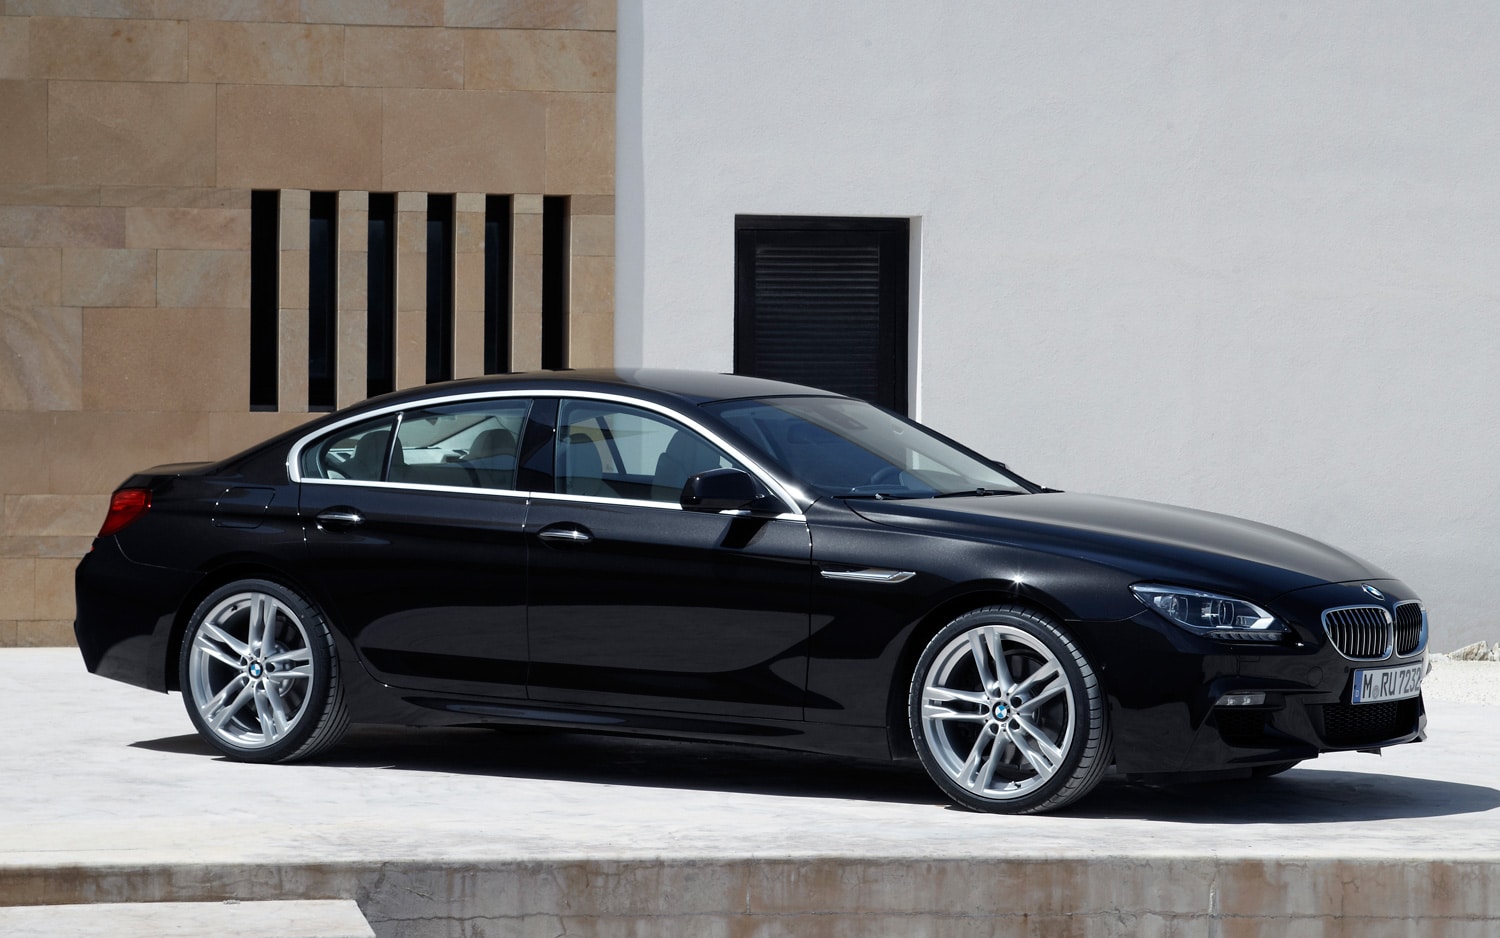 Confirmed: BMW M6 Gran Coupe Launching in 2013